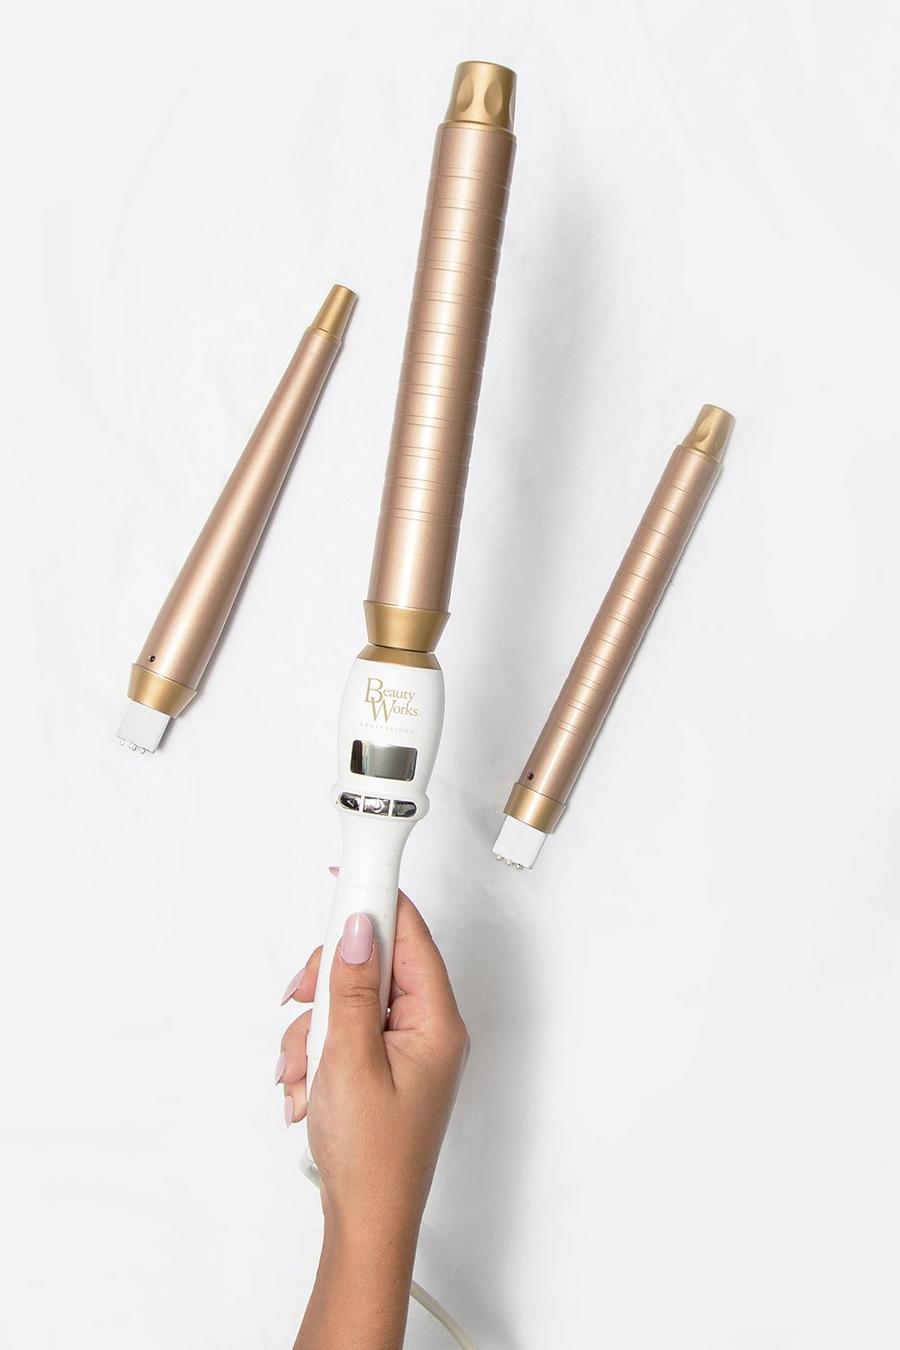 Beauty Works Pro Styler Trio Edition, Rotgold metallic